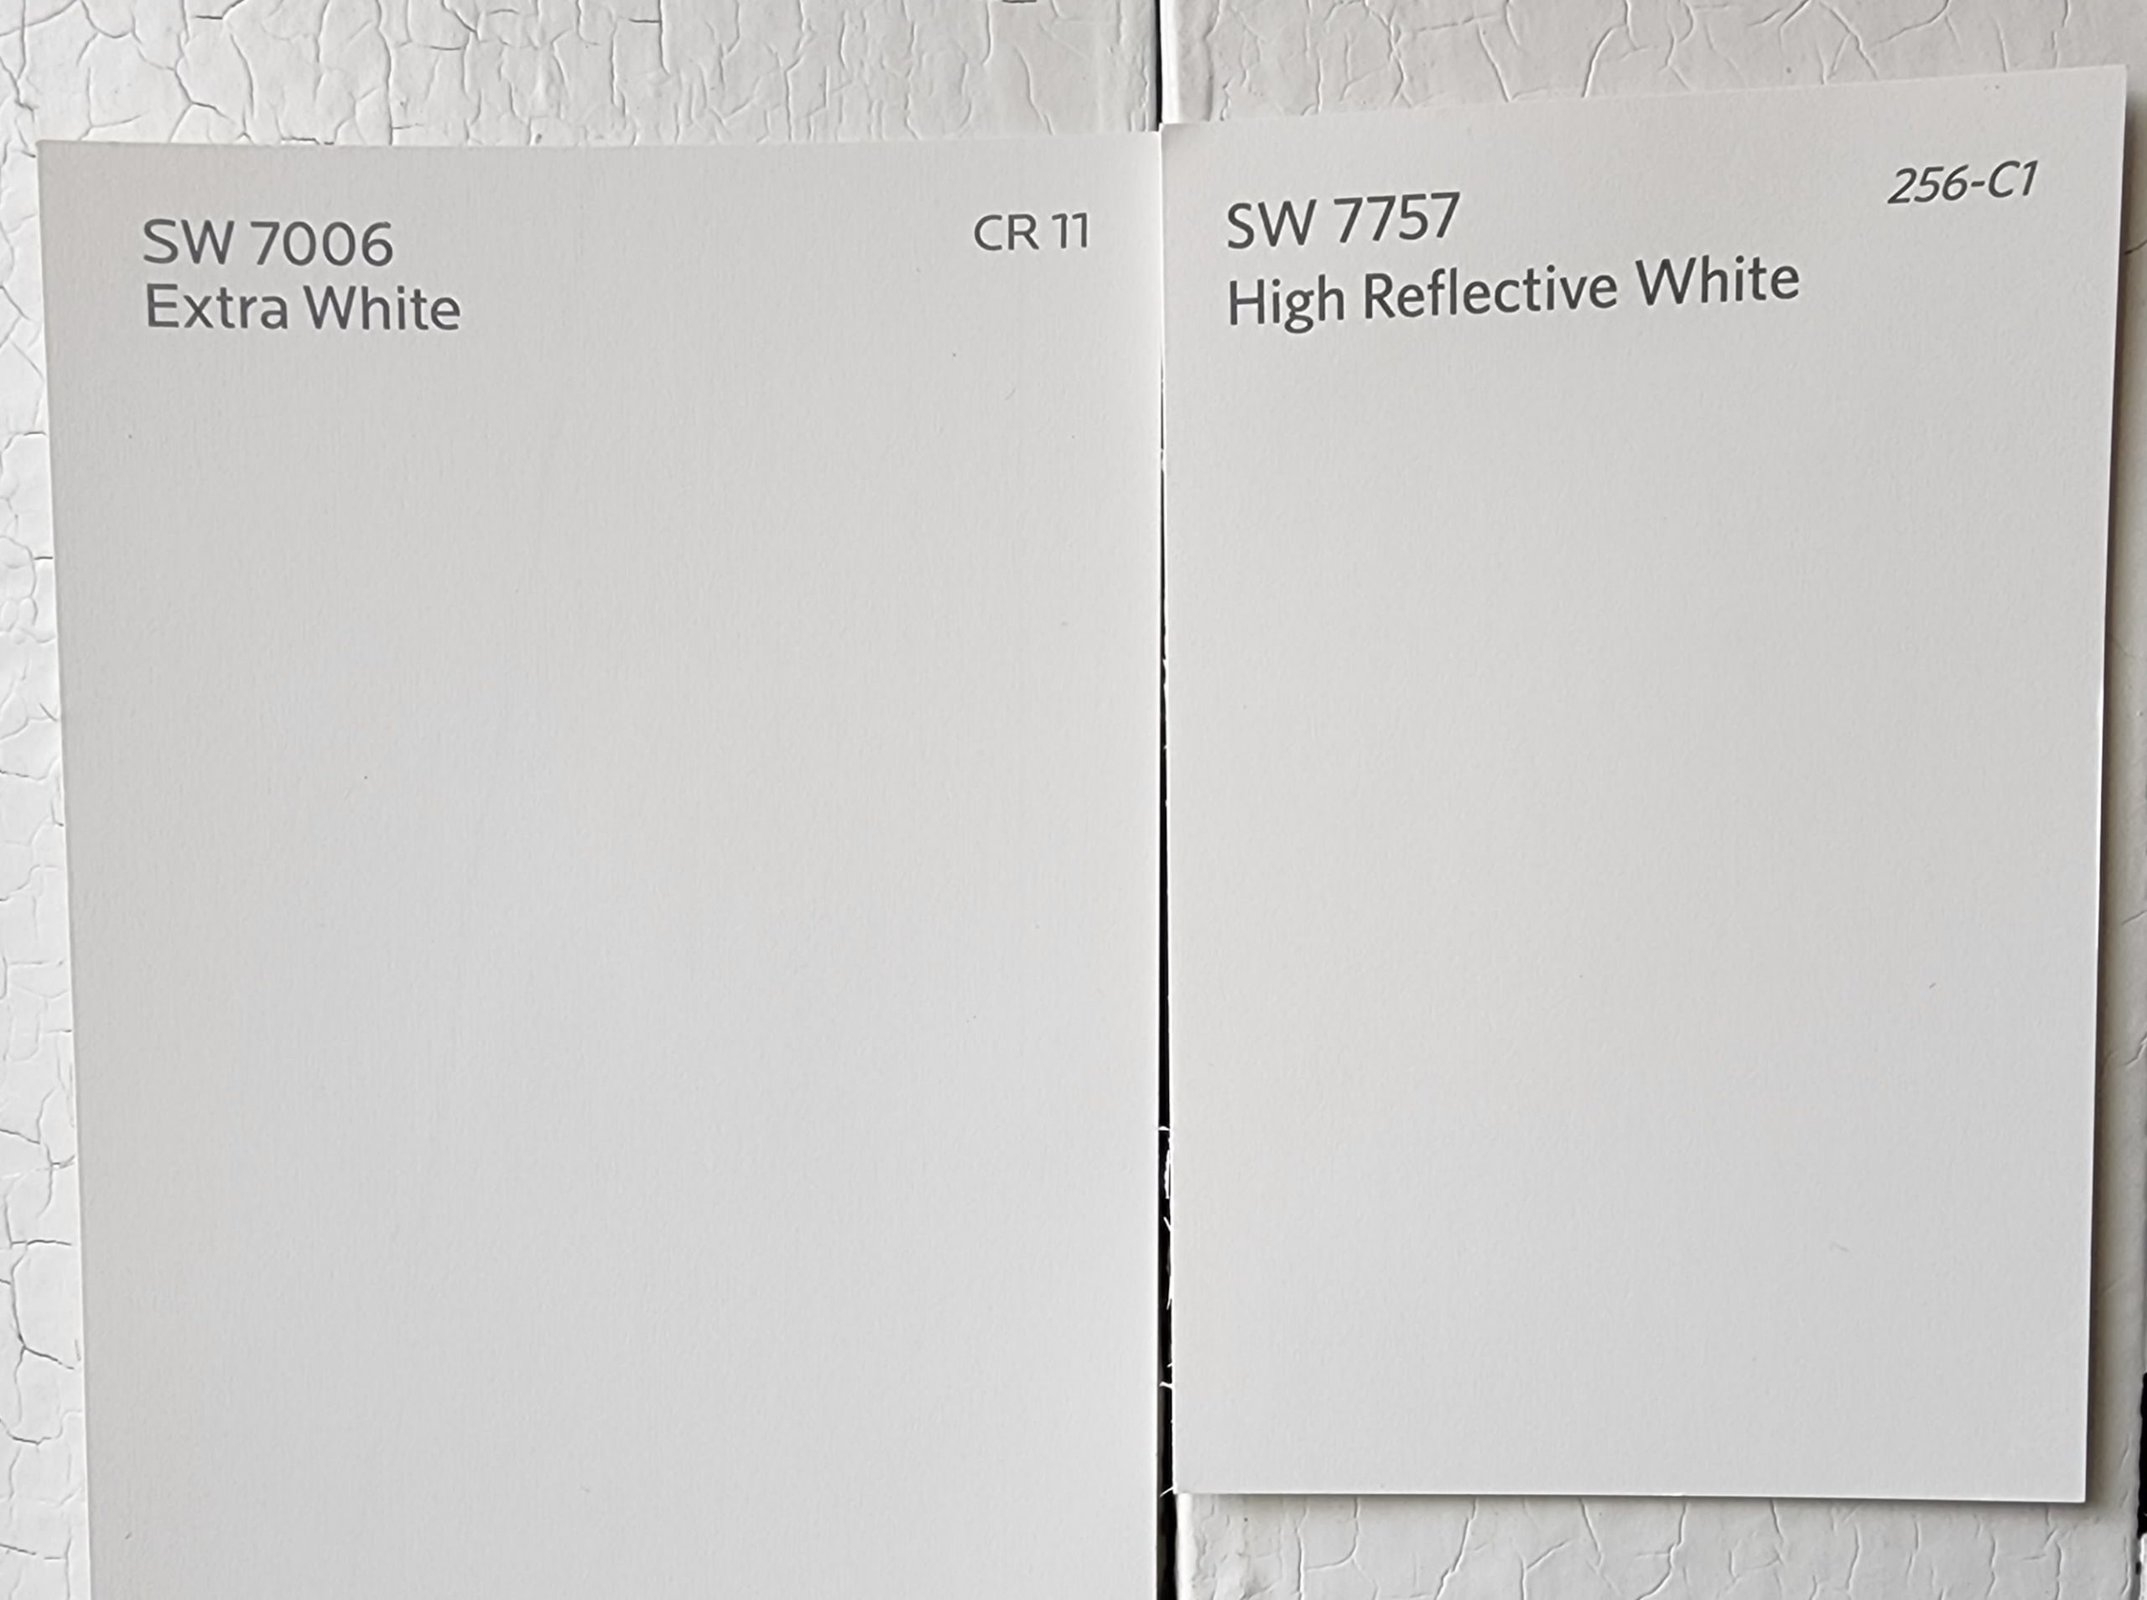  Extra White vs High Reflective White by Sherwin Williams scaled